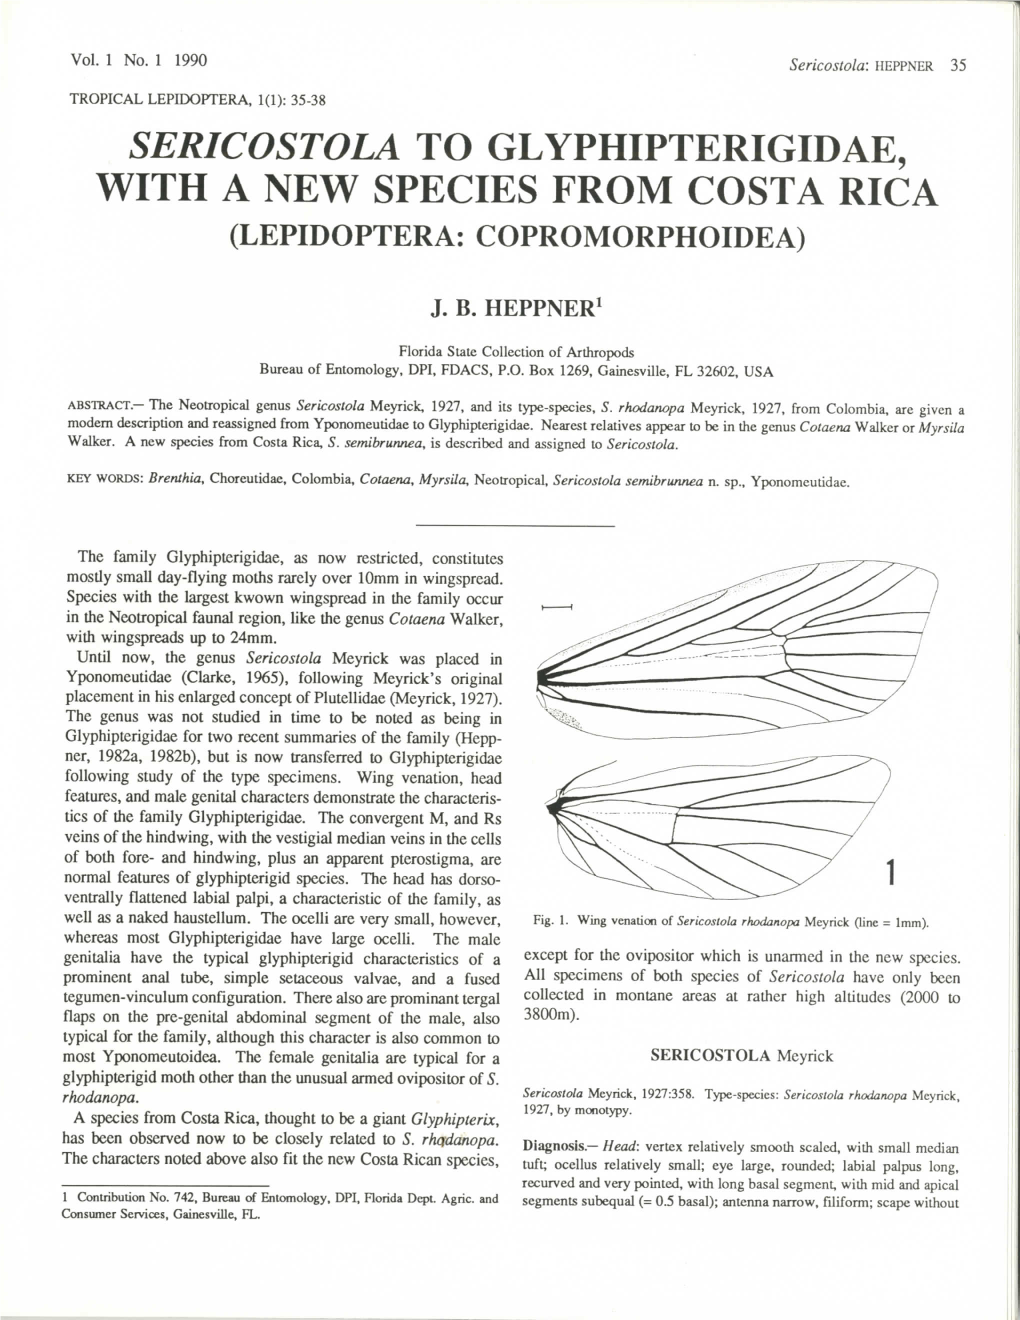 Sericostola to Glyphipterigidae, with a New Species from Costa Rica (Lepidoptera: Copromorphoidea)